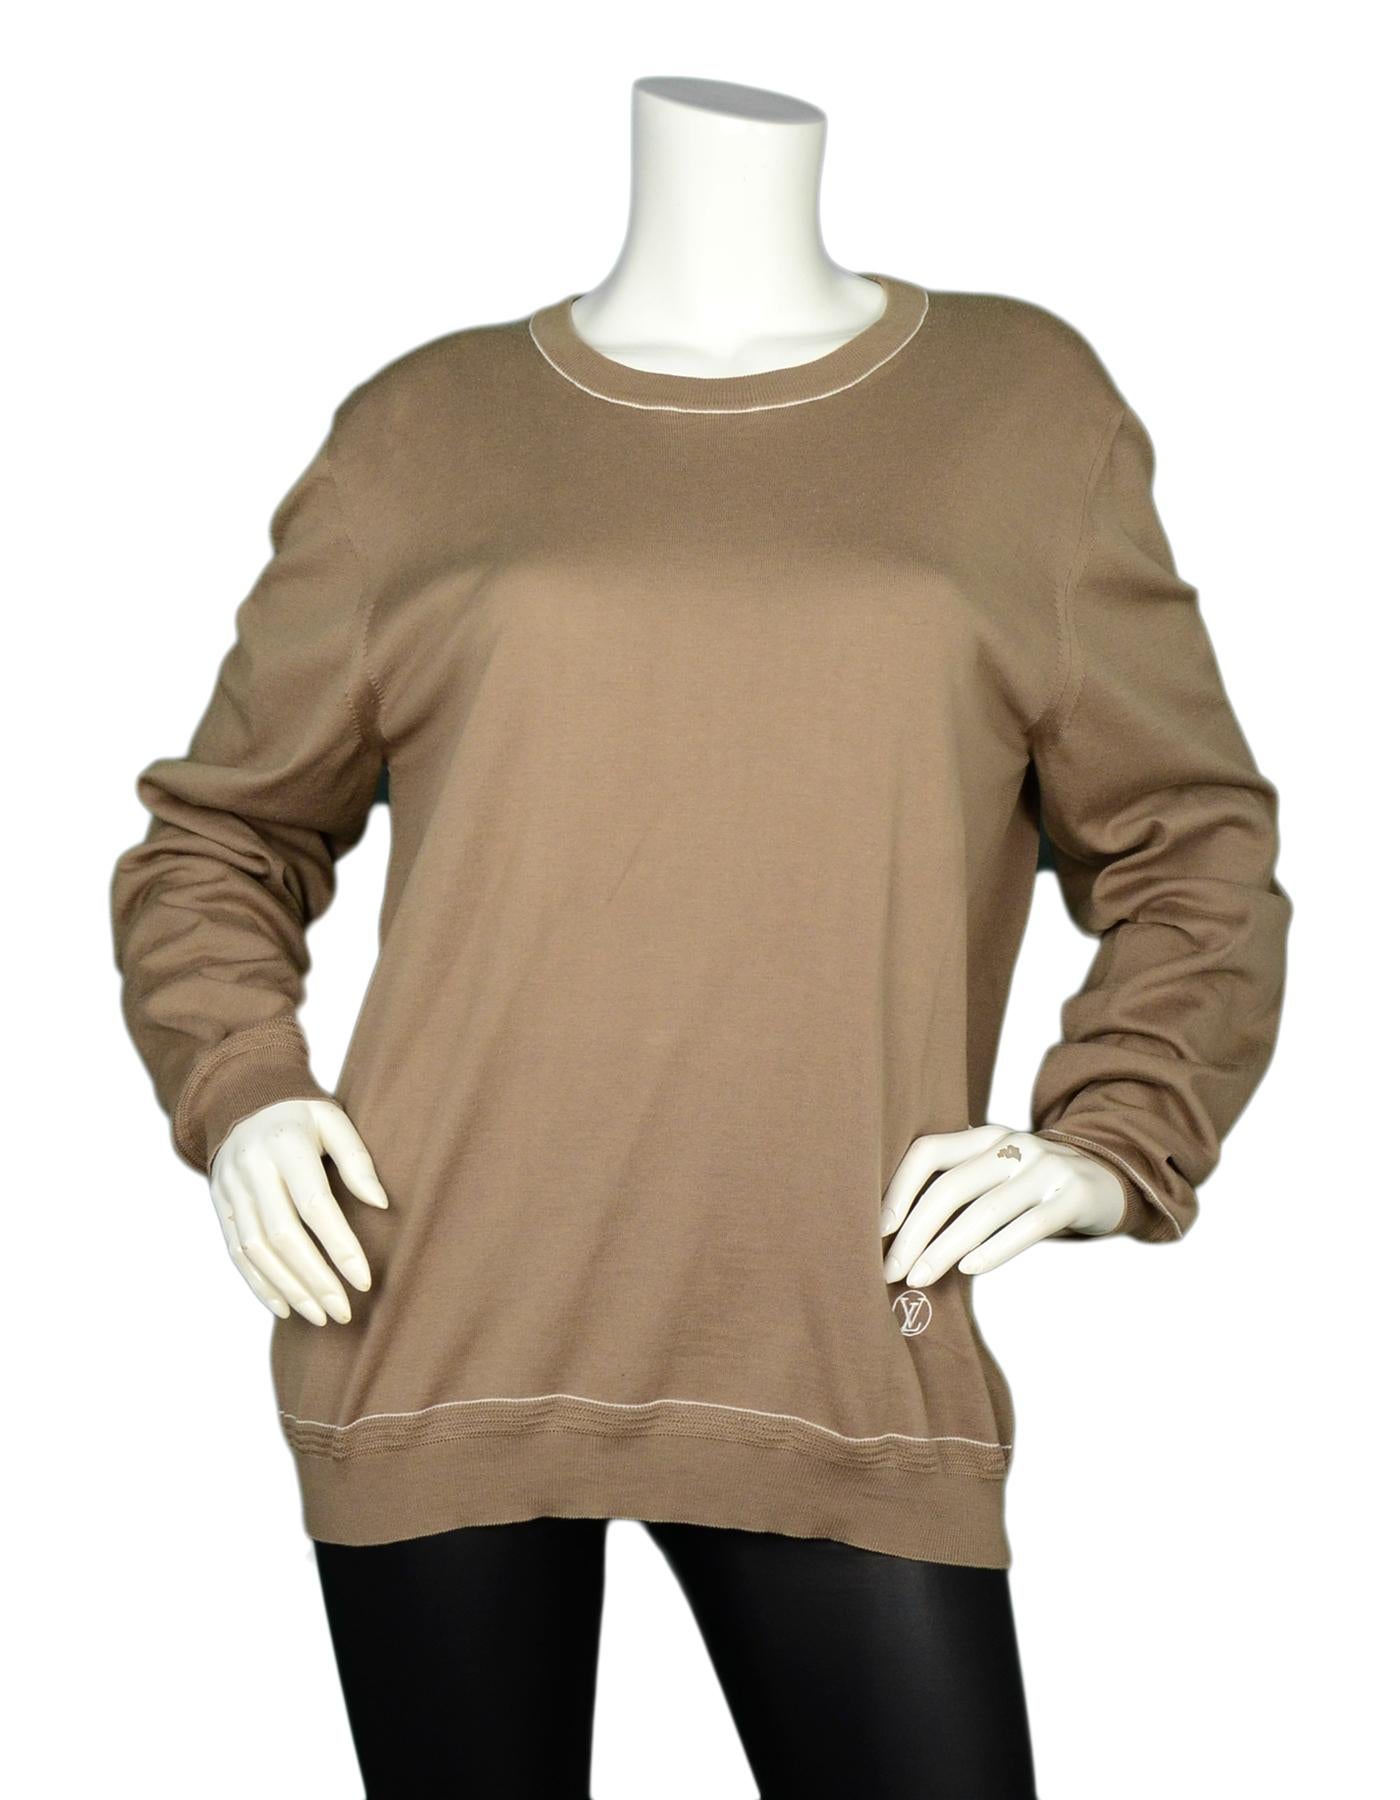 Louis Vuitton Brown Cotton/Silk Highlighted Rib Crewneck Sweater NWT Sz XL

Made In:   Italy
Color: Brown
Materials: 75% cotton, 20% silk, 5% cashmere
Opening/Closure: Pull over
Overall Condition: Excellent condition with original tags